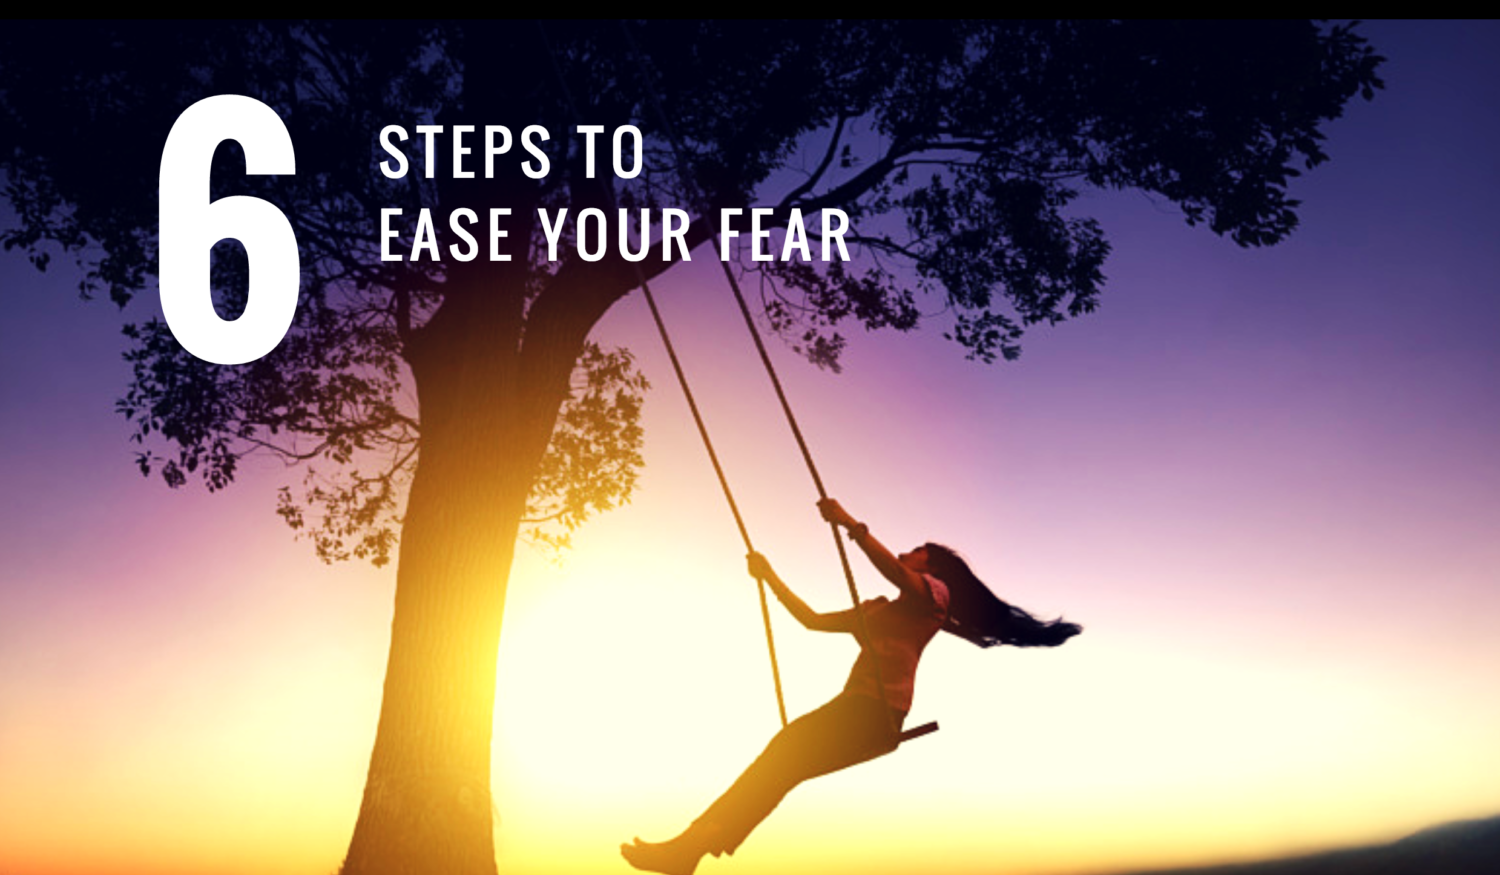 6 Steps to Ease Your Fear